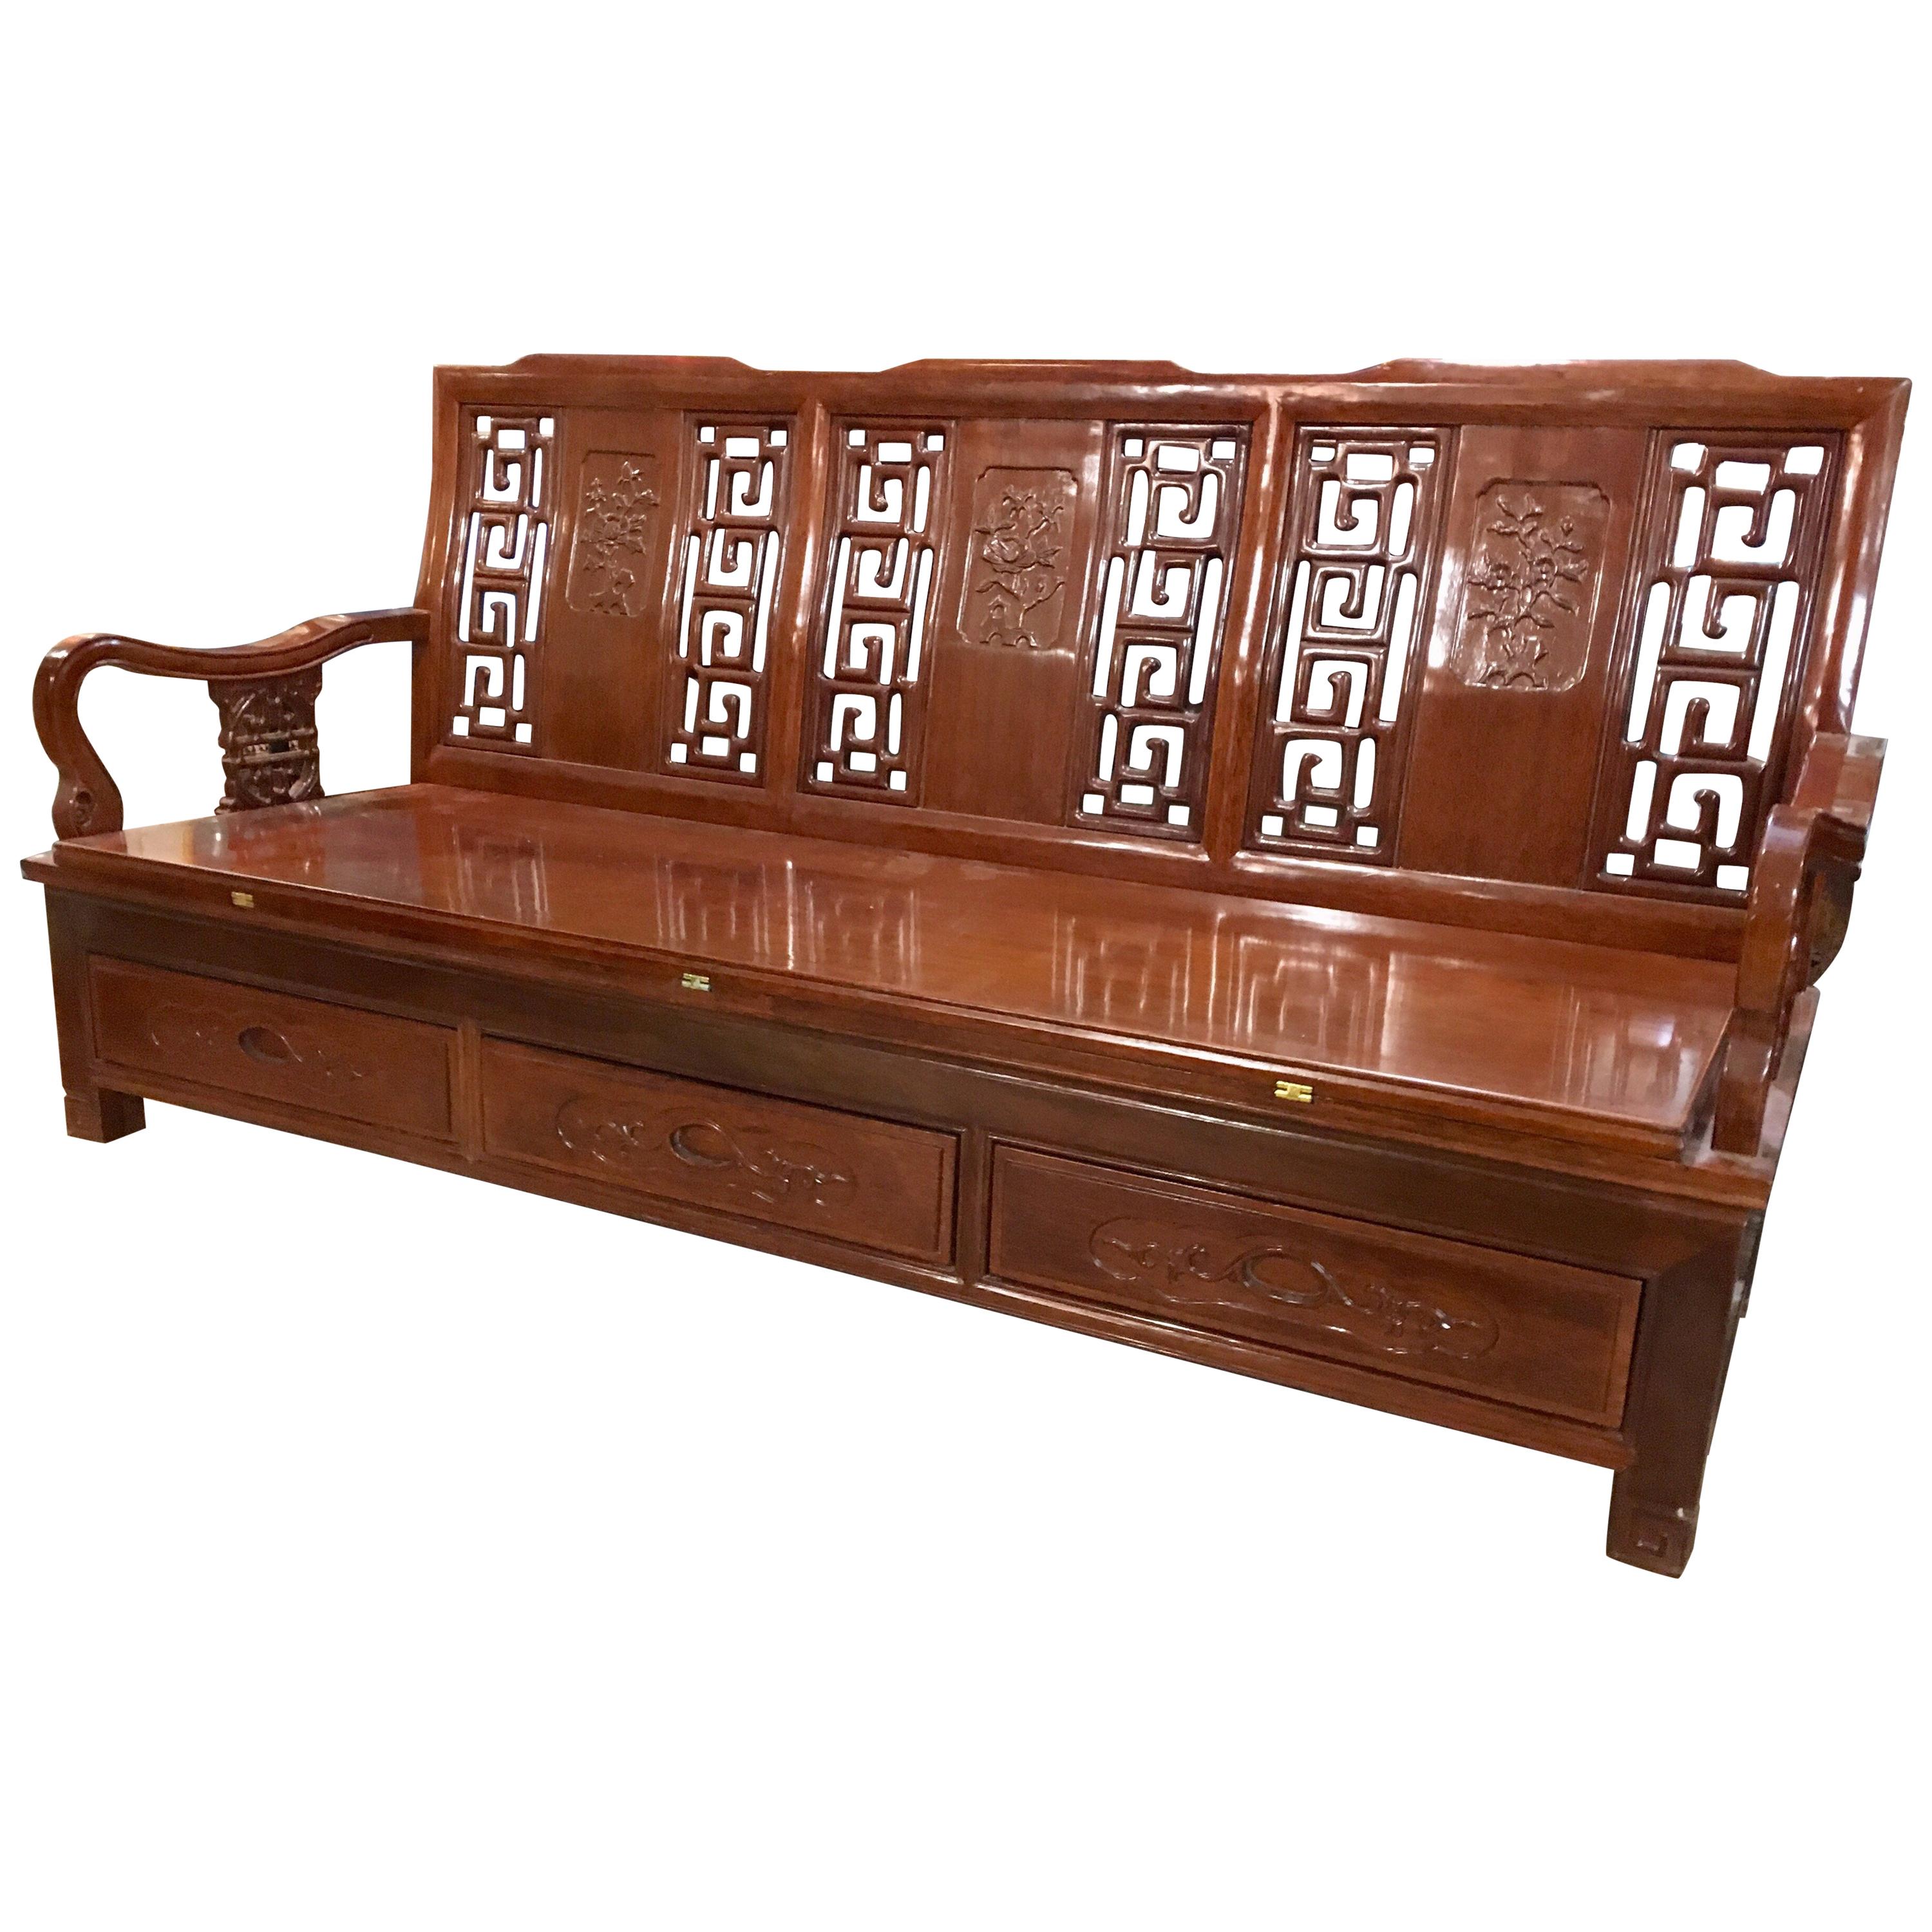 Asian Bench Carved Wood Expandable Daybed Platform Bed Settee